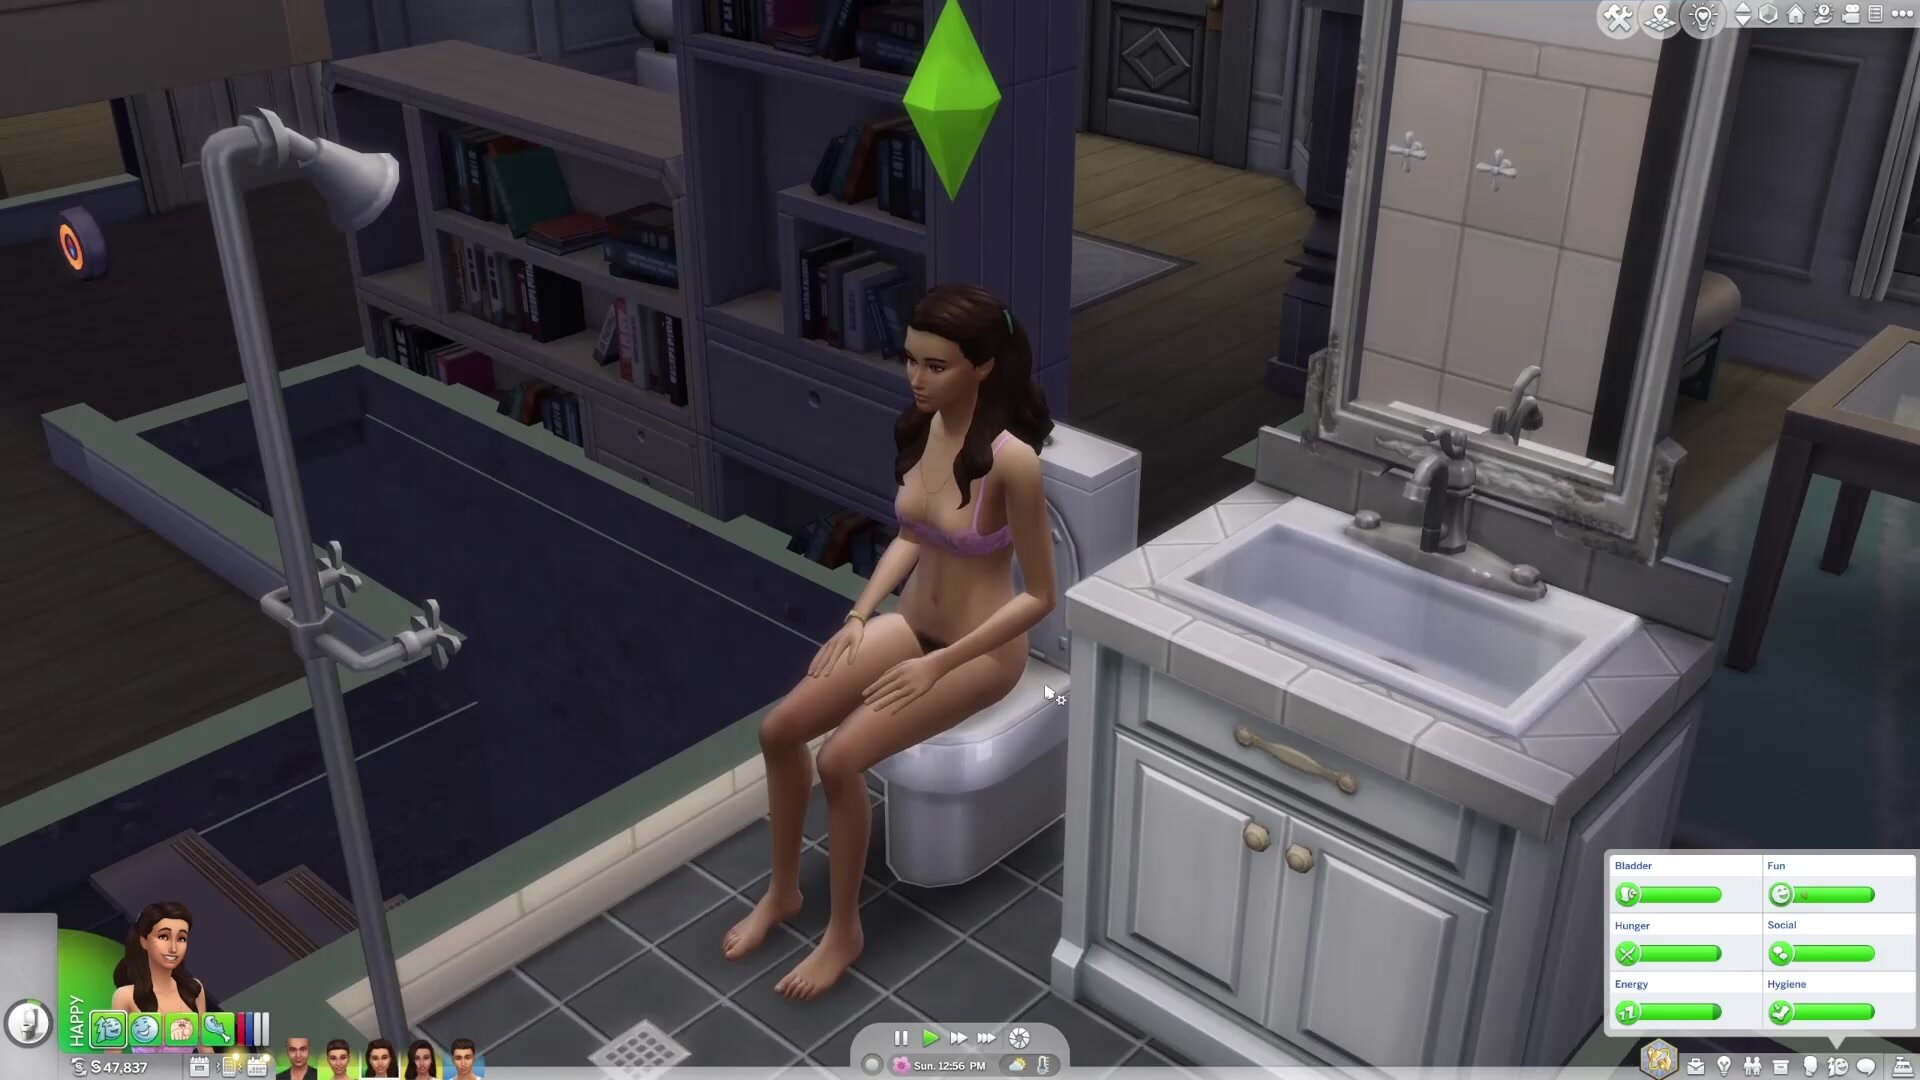 Sims 4 Pooping with all real poop sounds